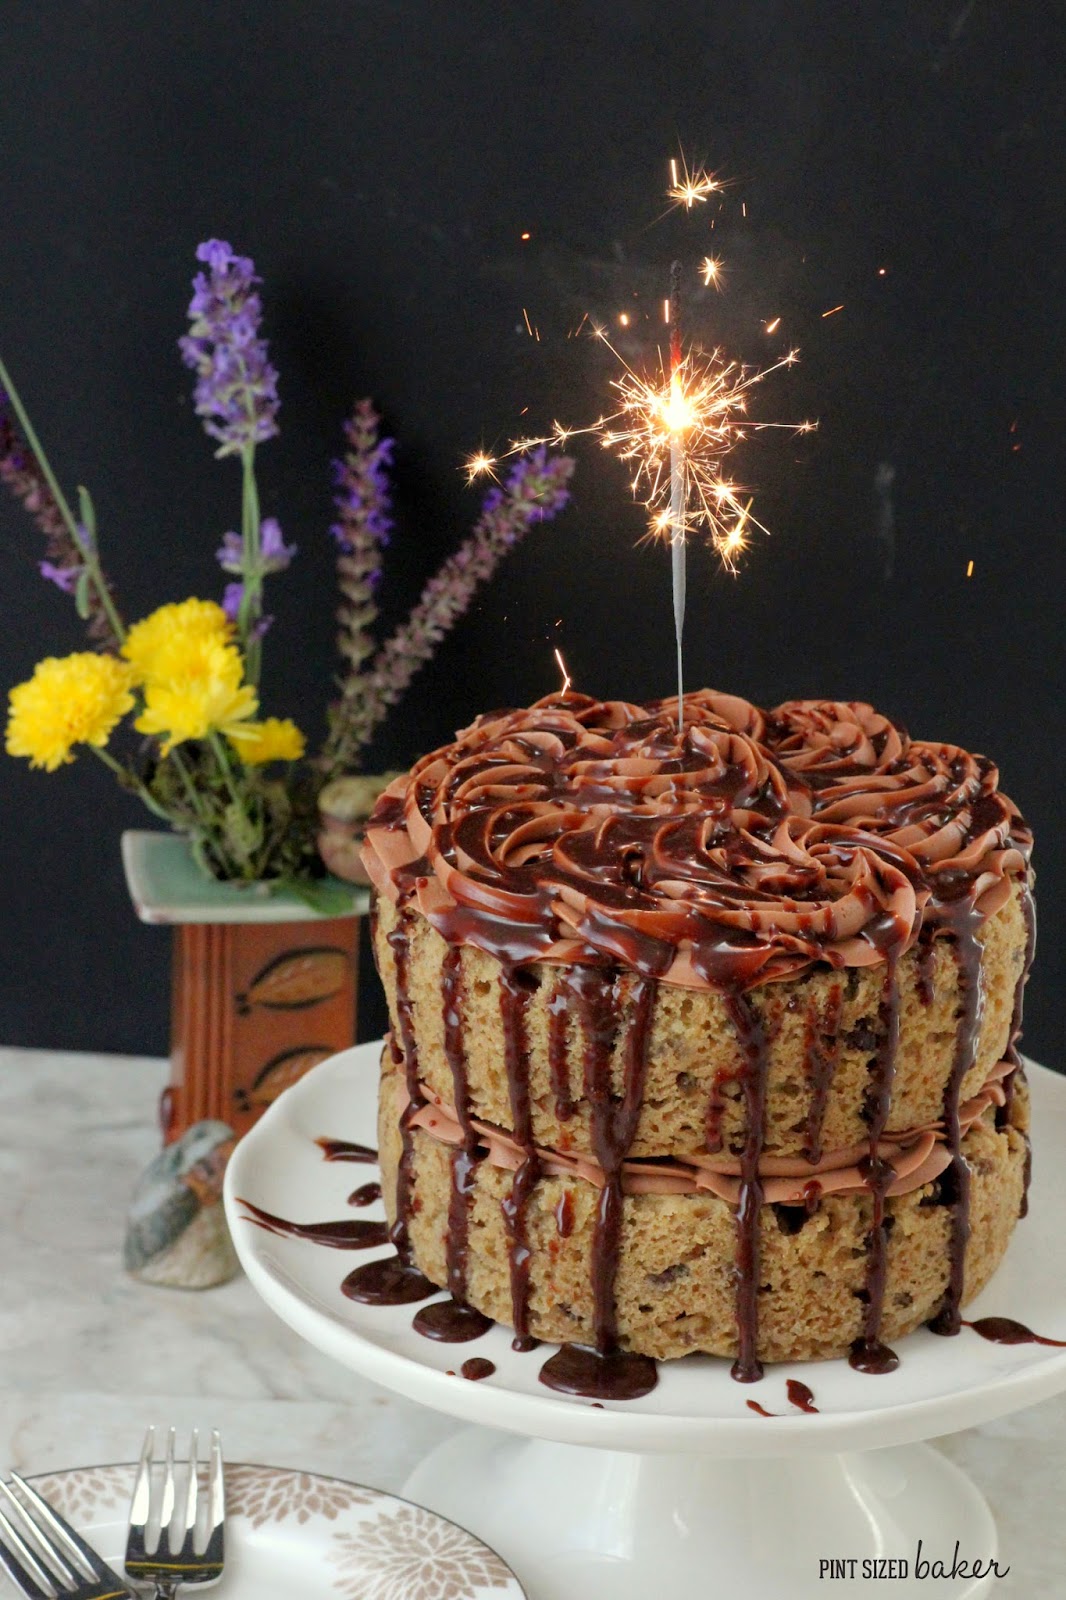 I loved this banana cake with chocolate hazelnut frosting. It was so delicious and full of flavor - perfect for my birthday cake.